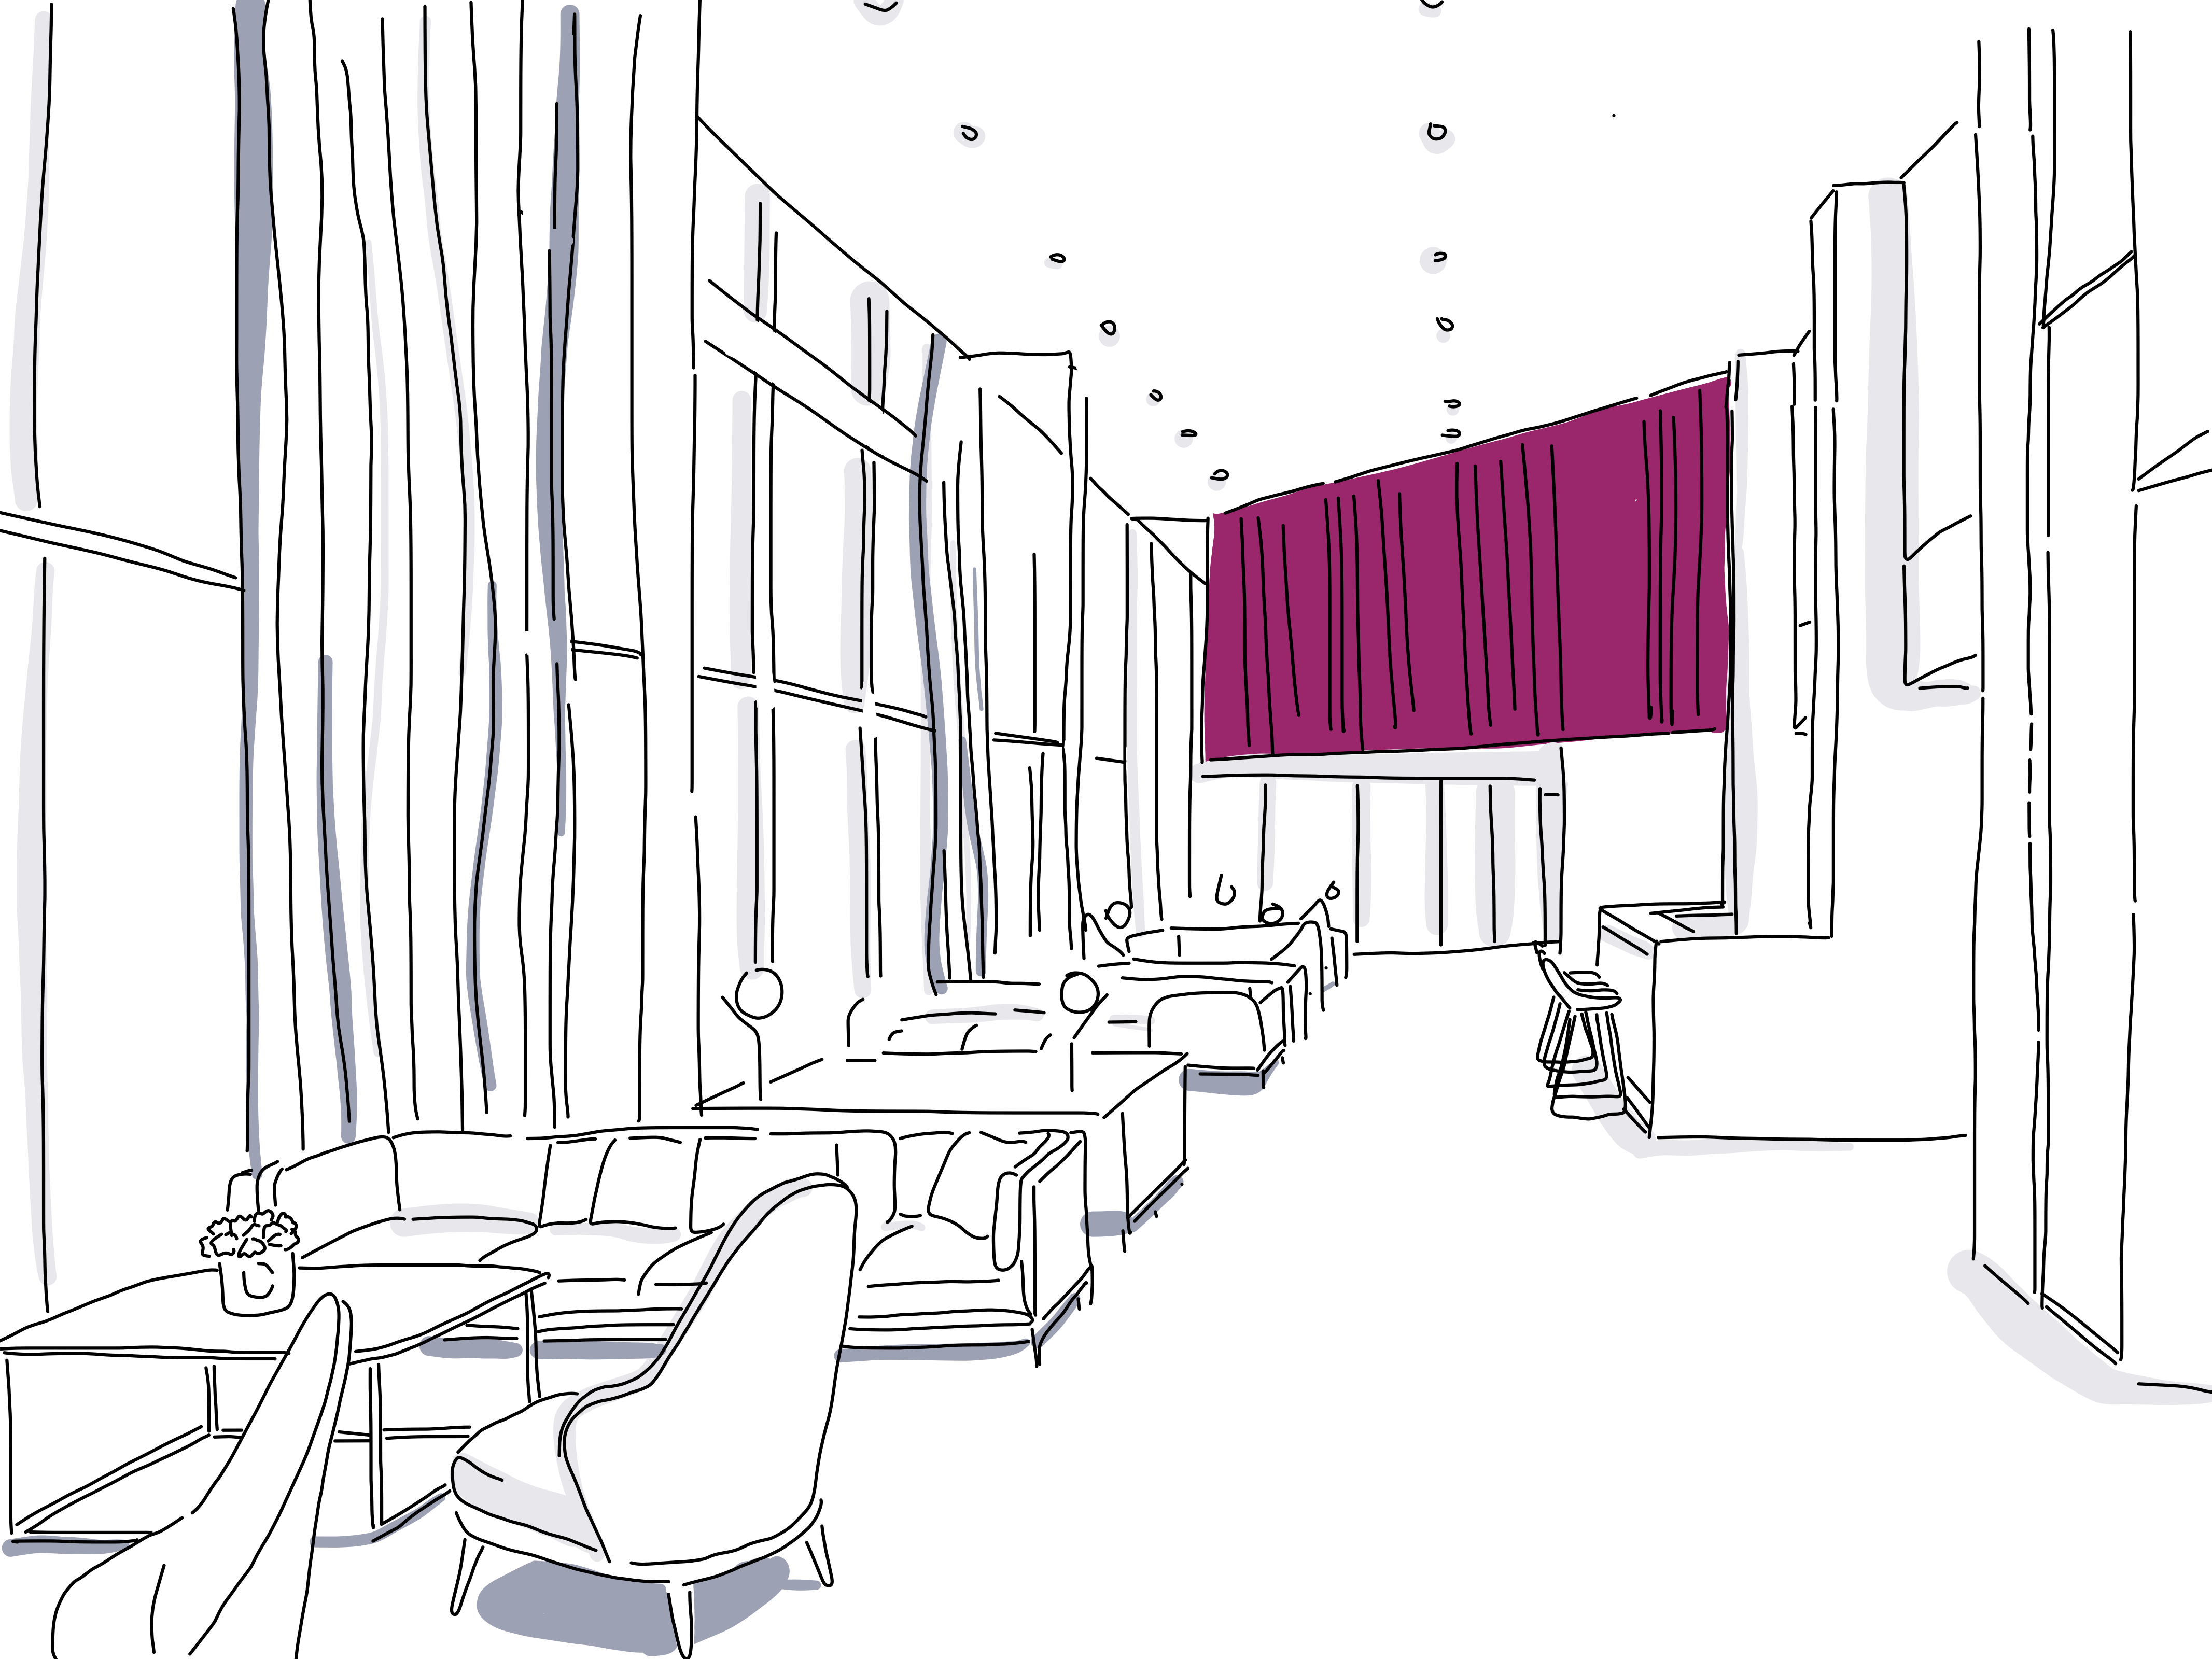 3d illustration showing hotel lobby with tables and chairs